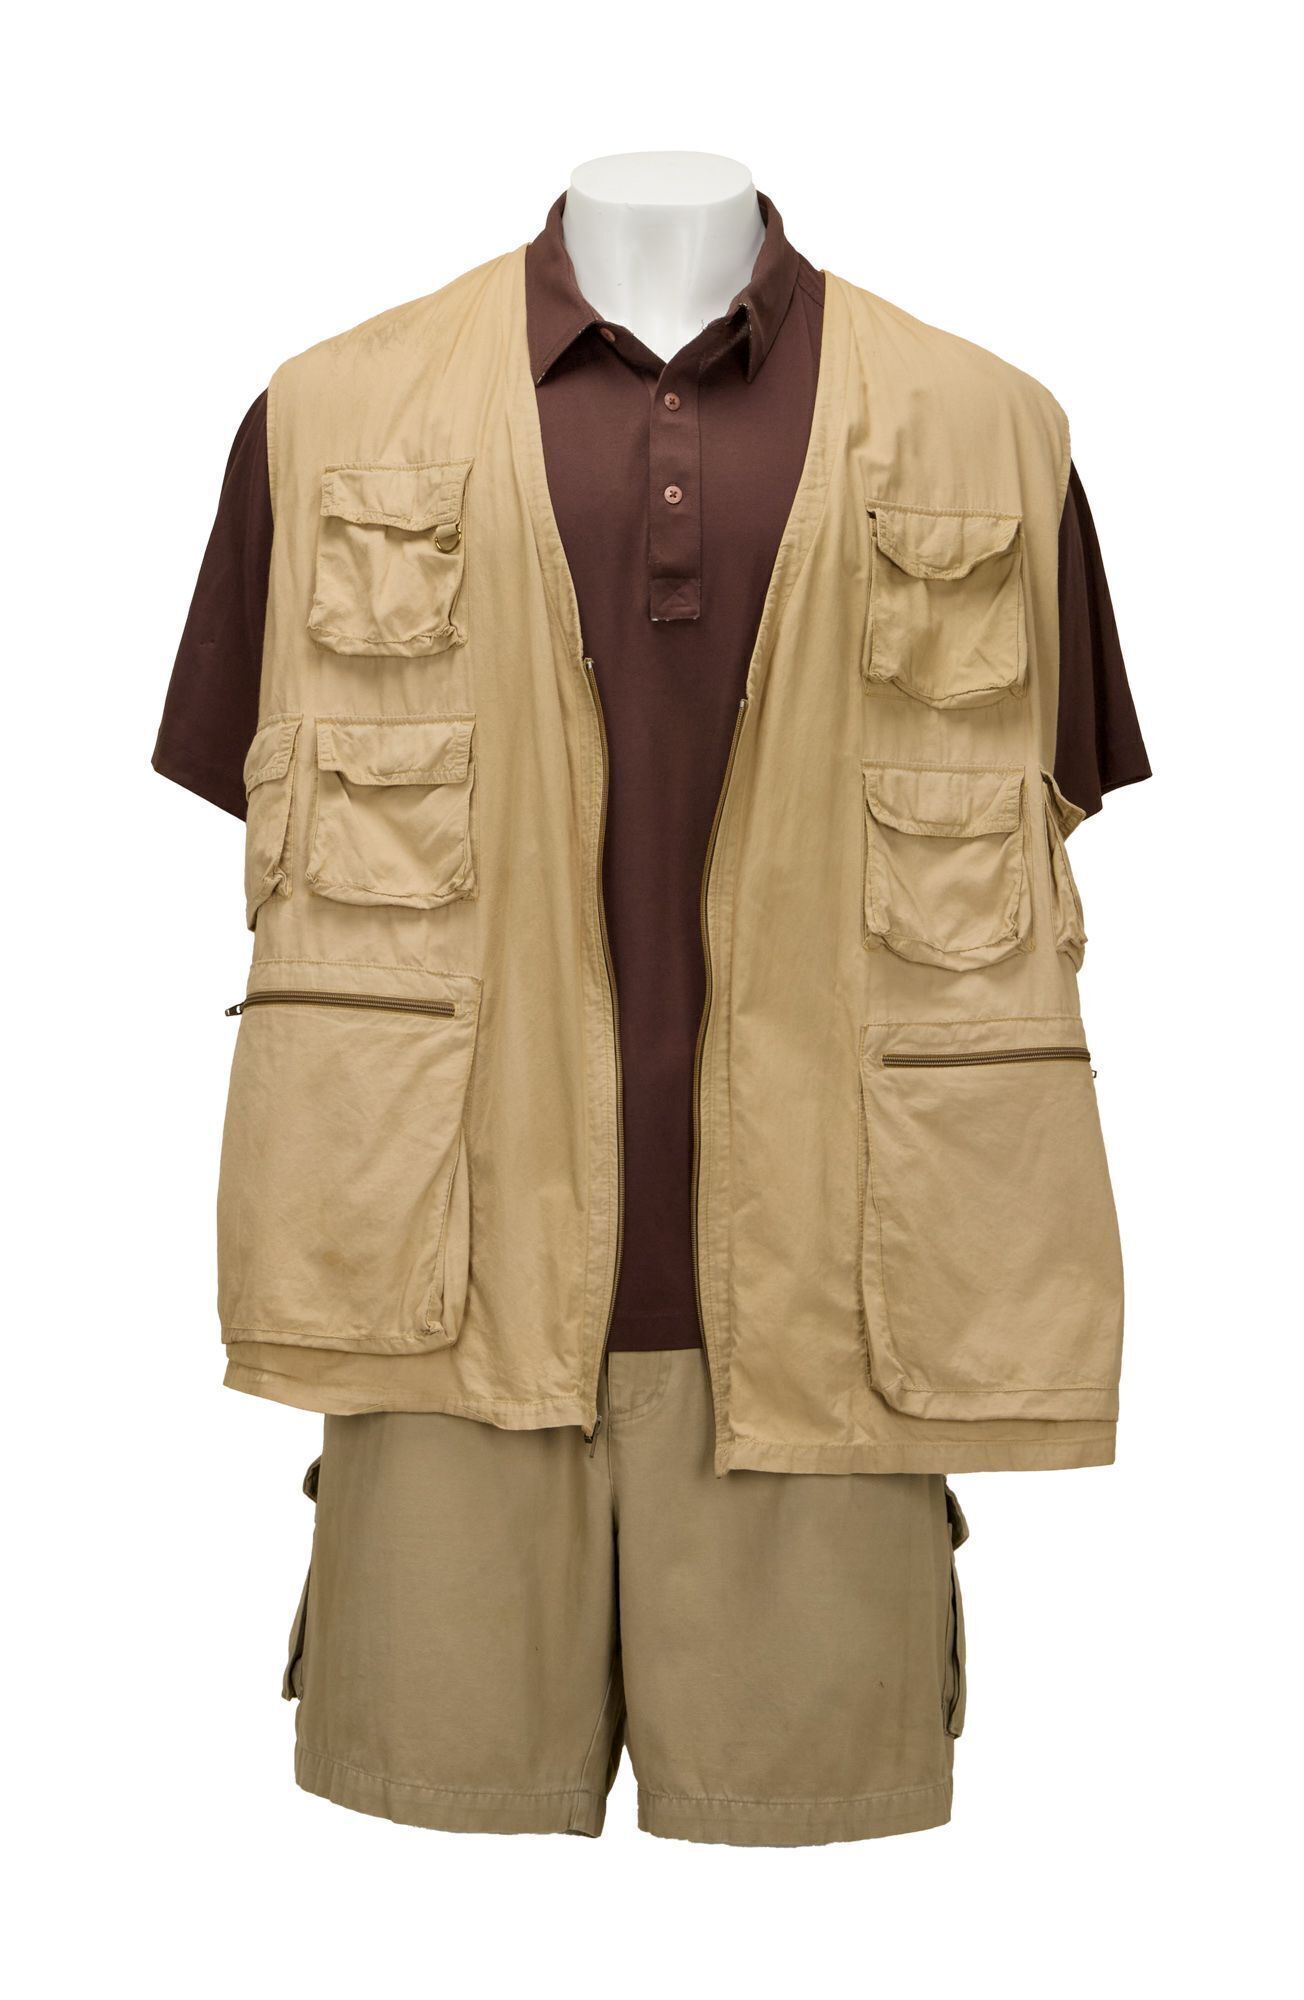 A seven-piece ensemble worn by John Goodman as Walter Sobchak during the production of "The Big Lebowski" (Gramercy Pictures, 1998) and on one of the posters for the film